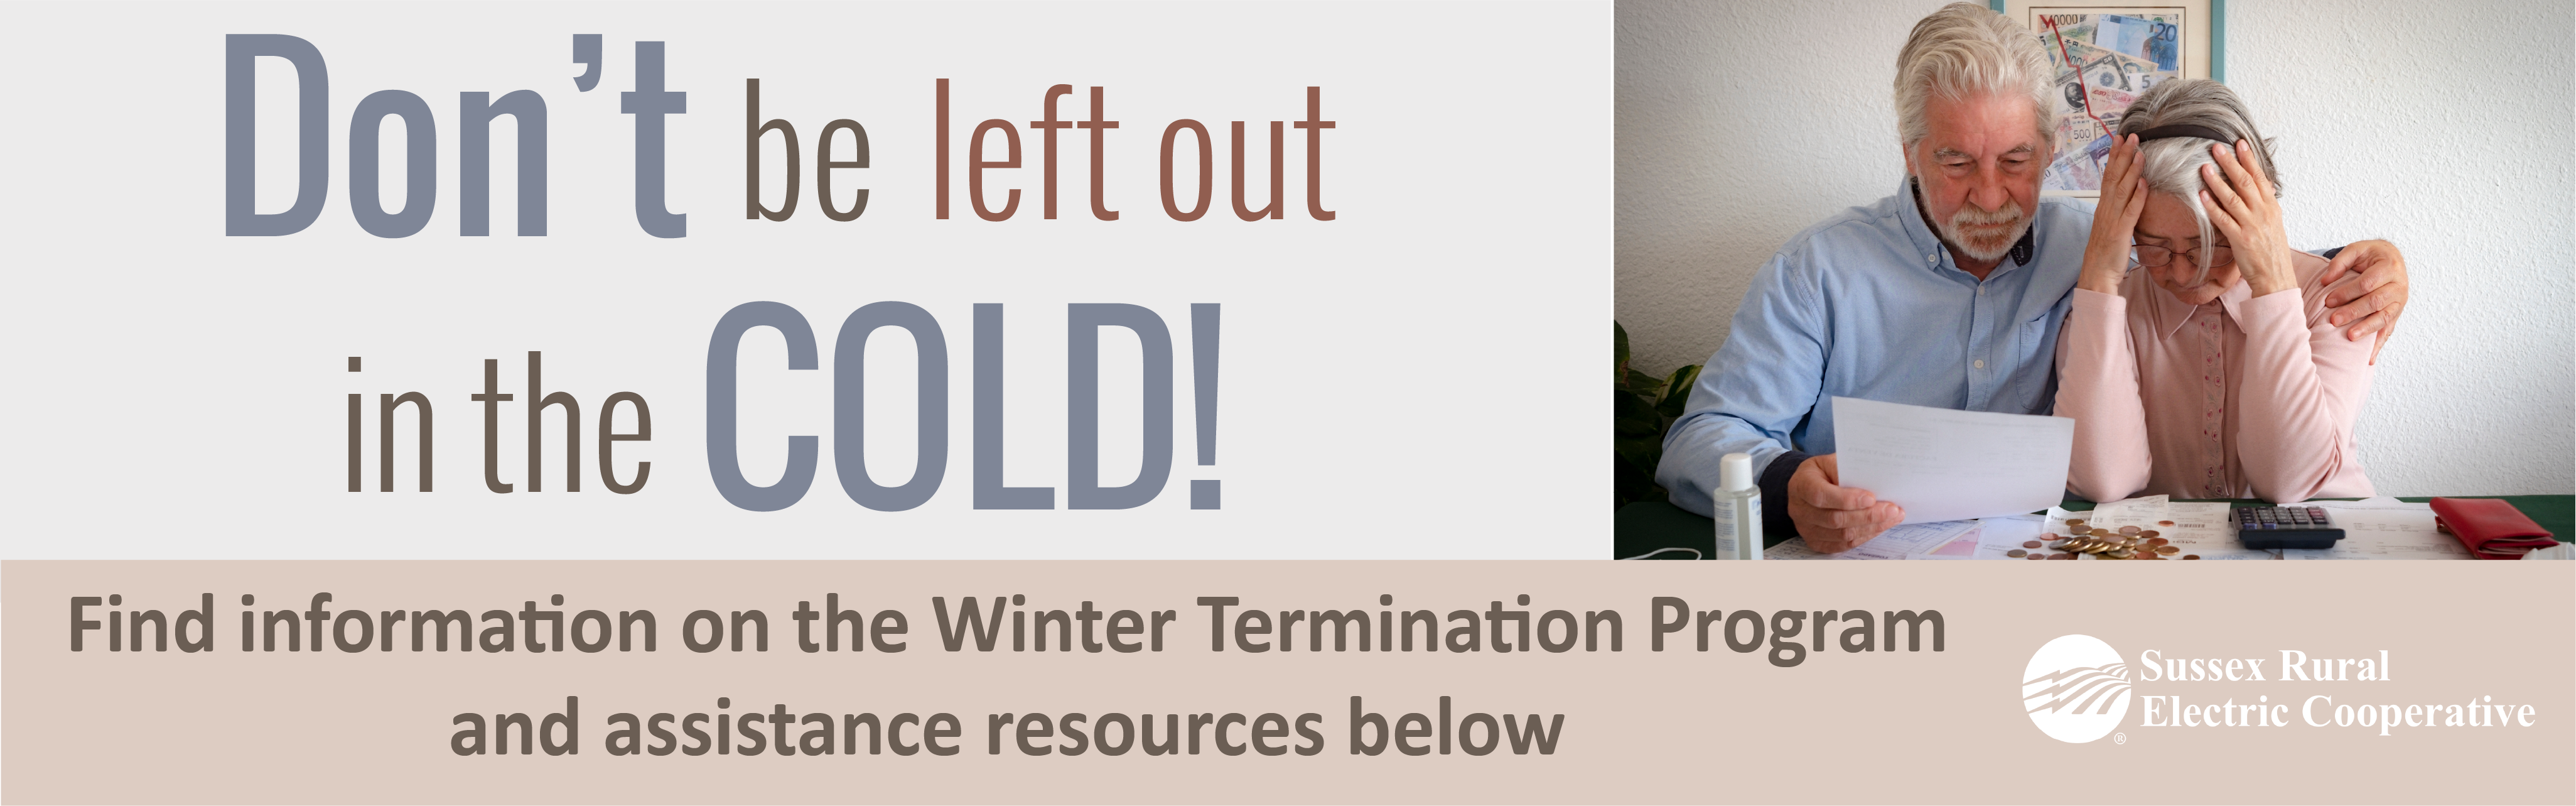 Don't be left out in the COLD! Find information on the Winter Termination Program and assistance resources below - Sussex Rural Electric Cooperative